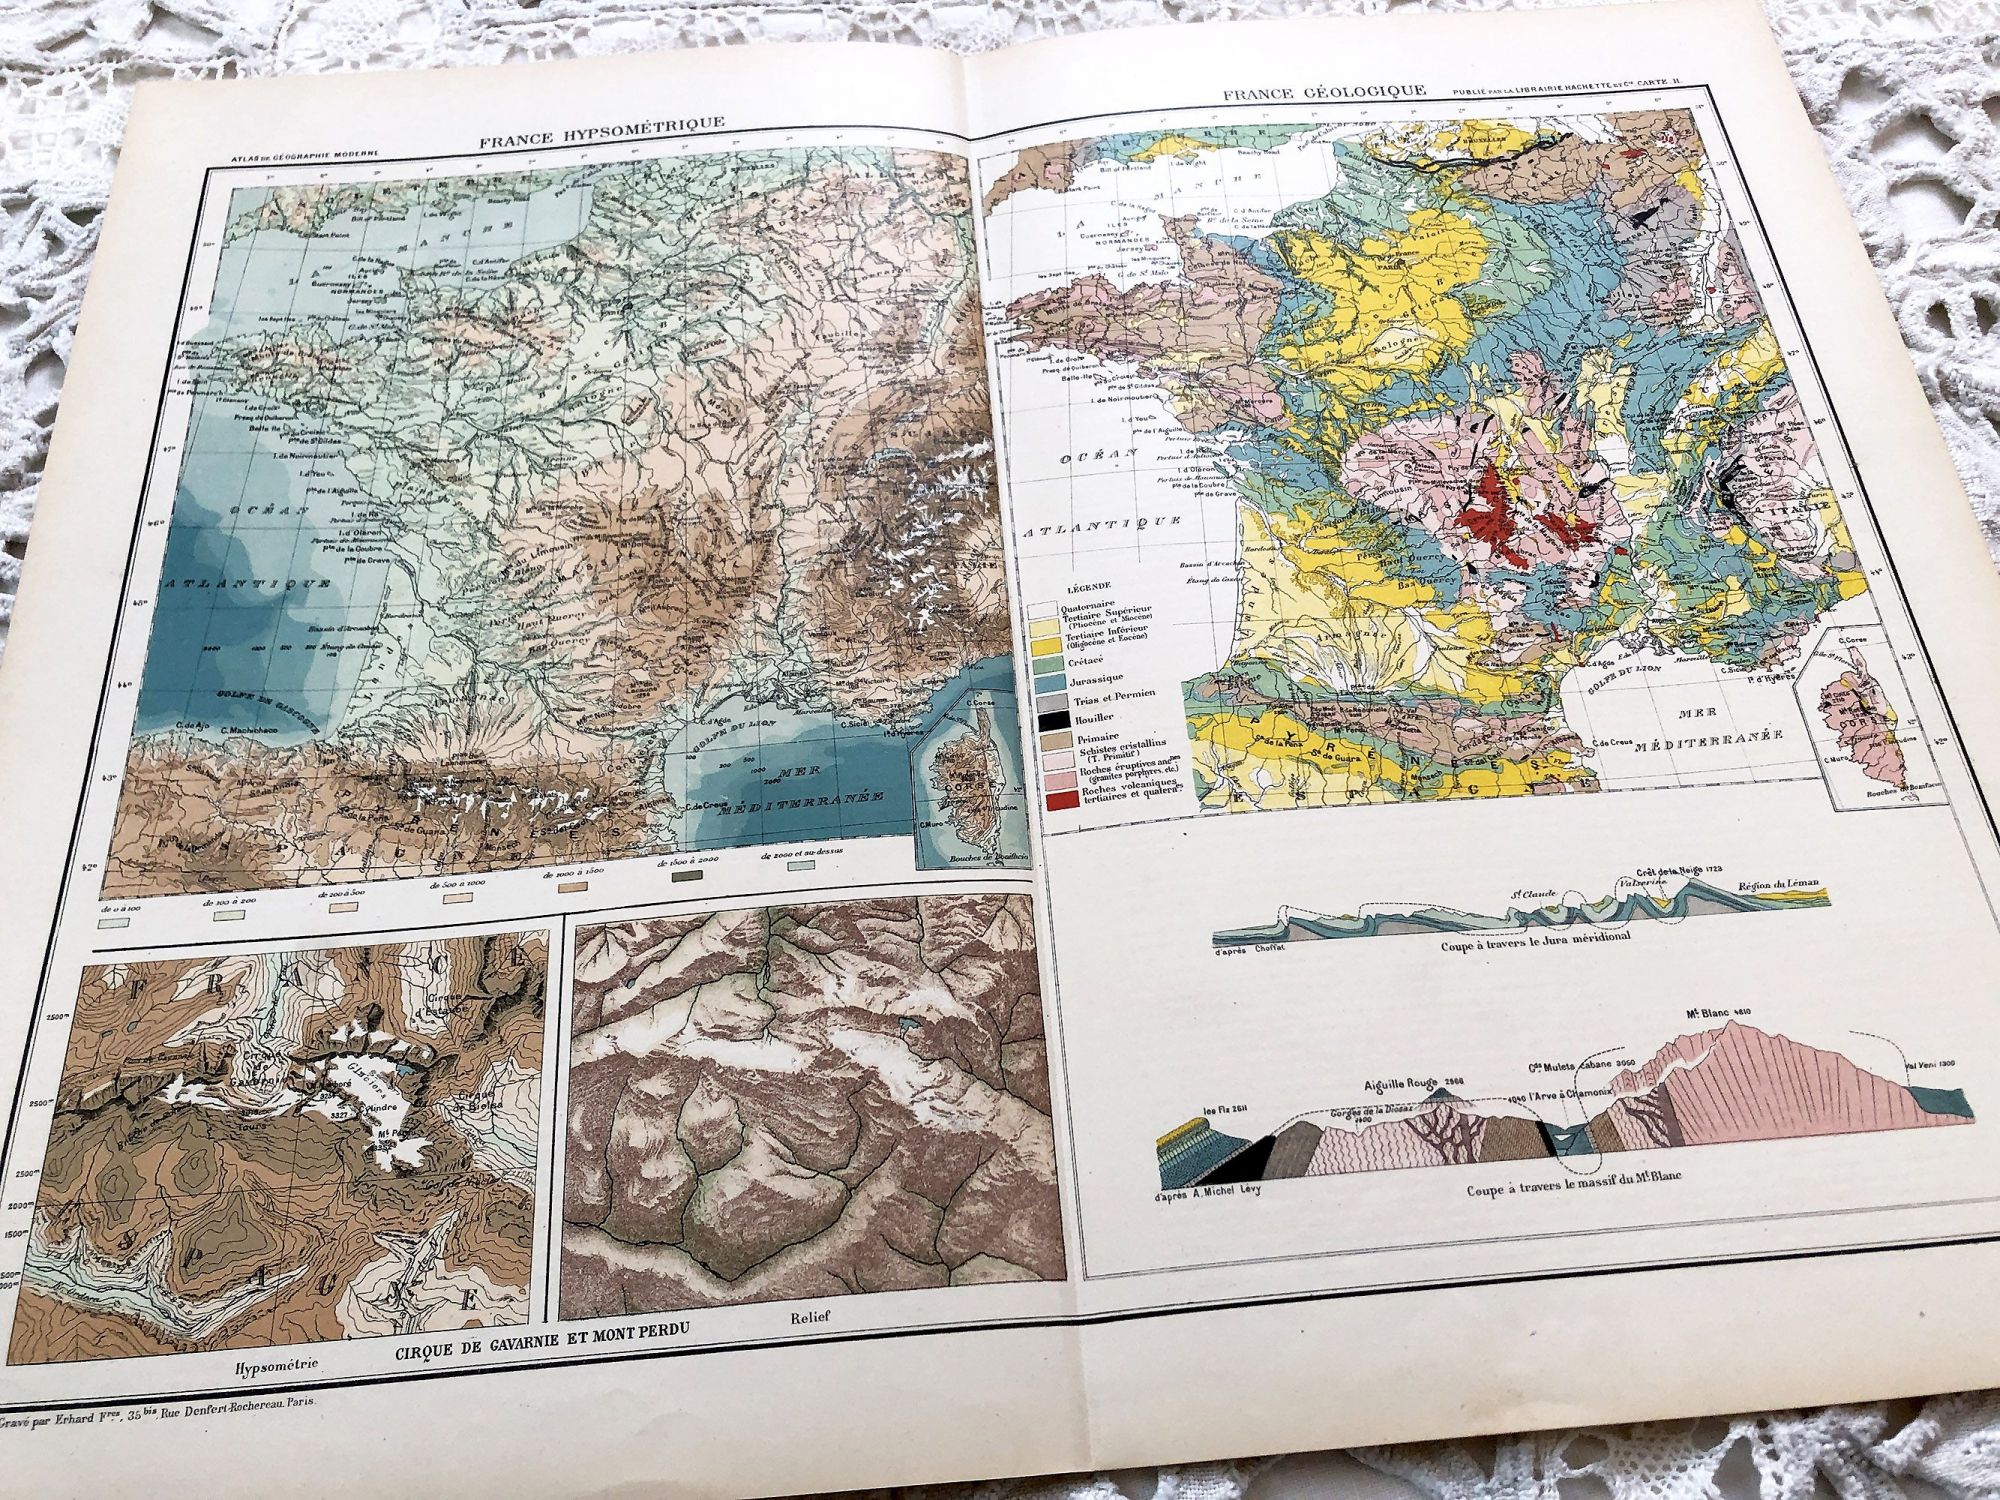 Large vintage map of France geological and hypsometric from a French atlas of the 1910s